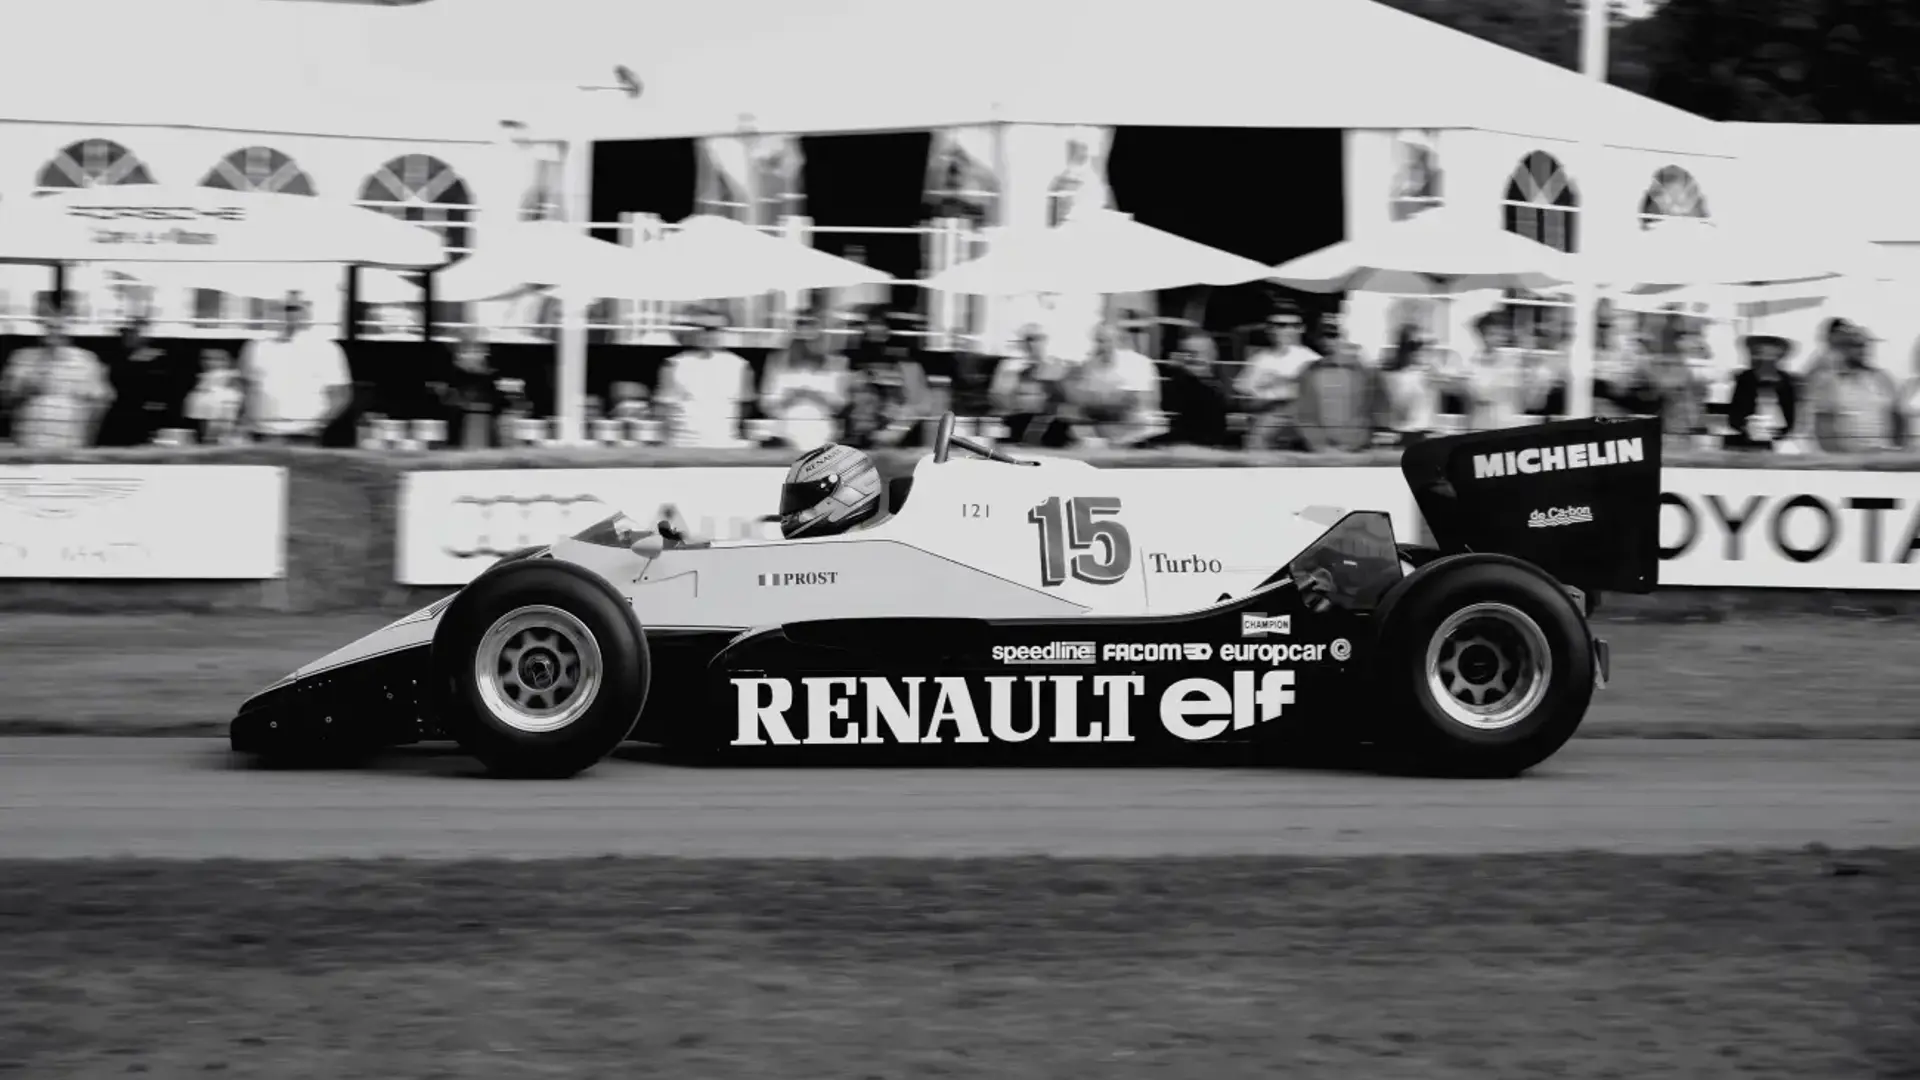 F1 Car in black and white